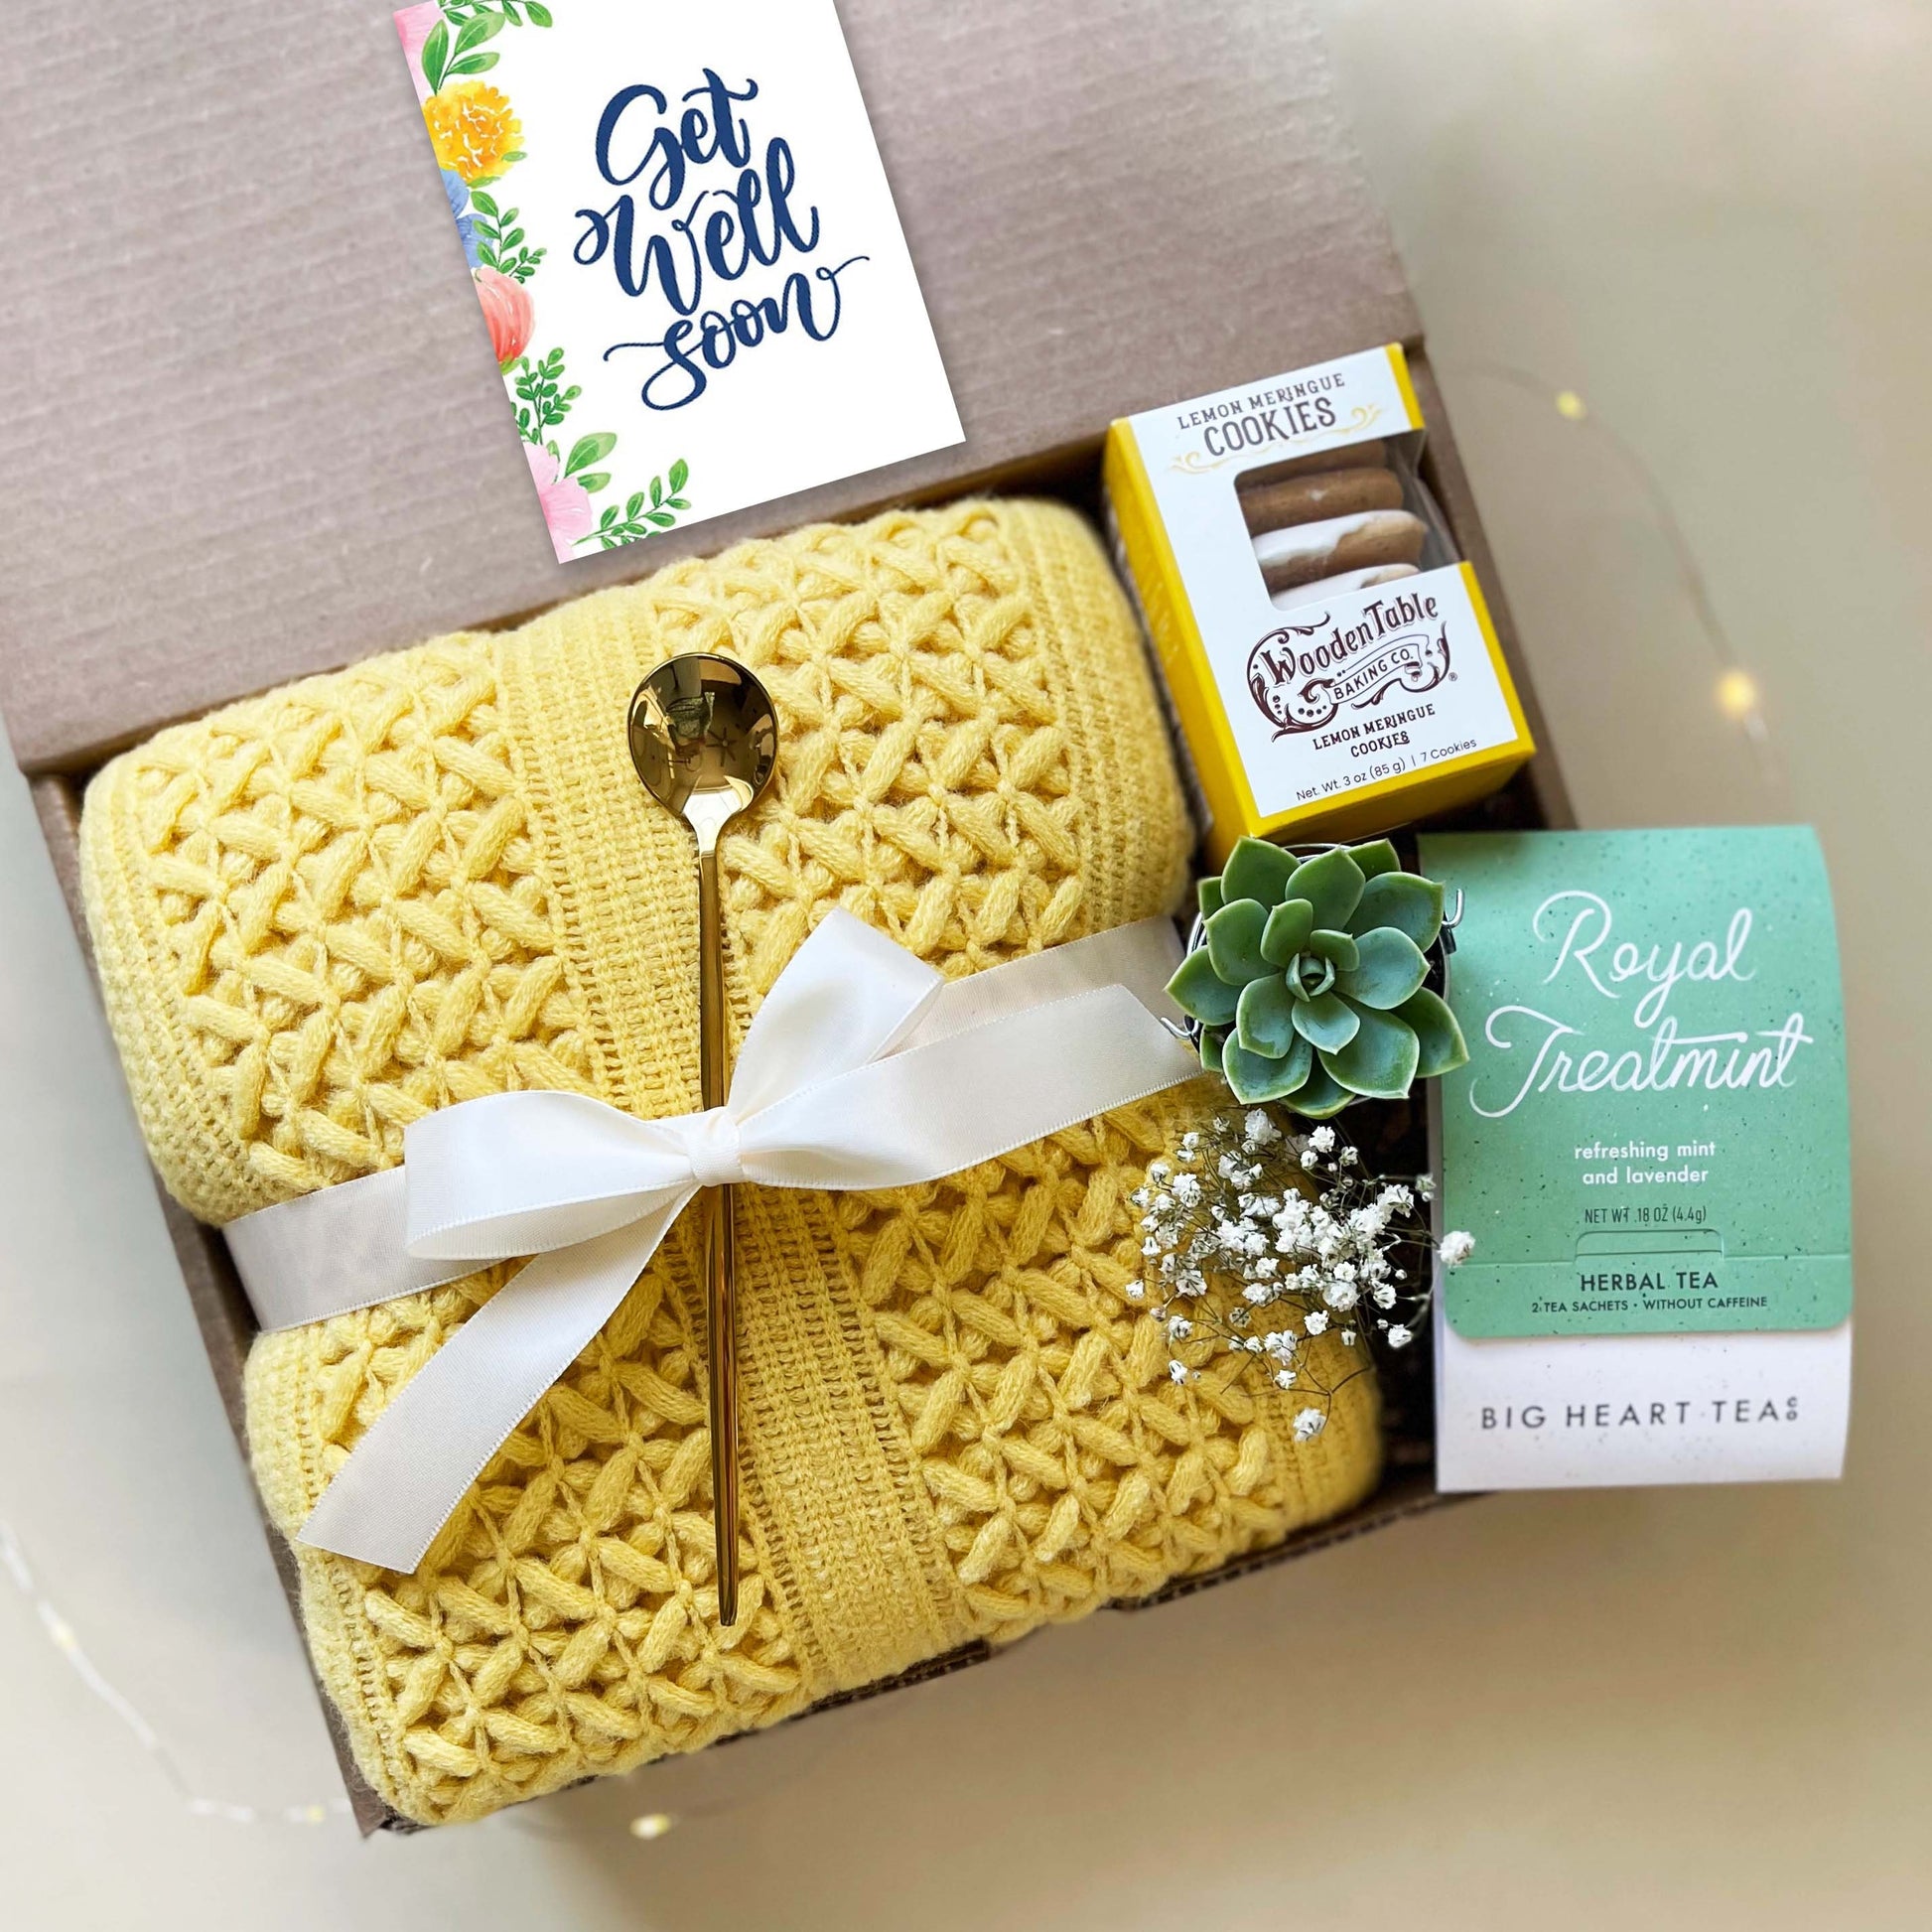 Get Well Care Package for Women, Bestie Gift Basket for Her